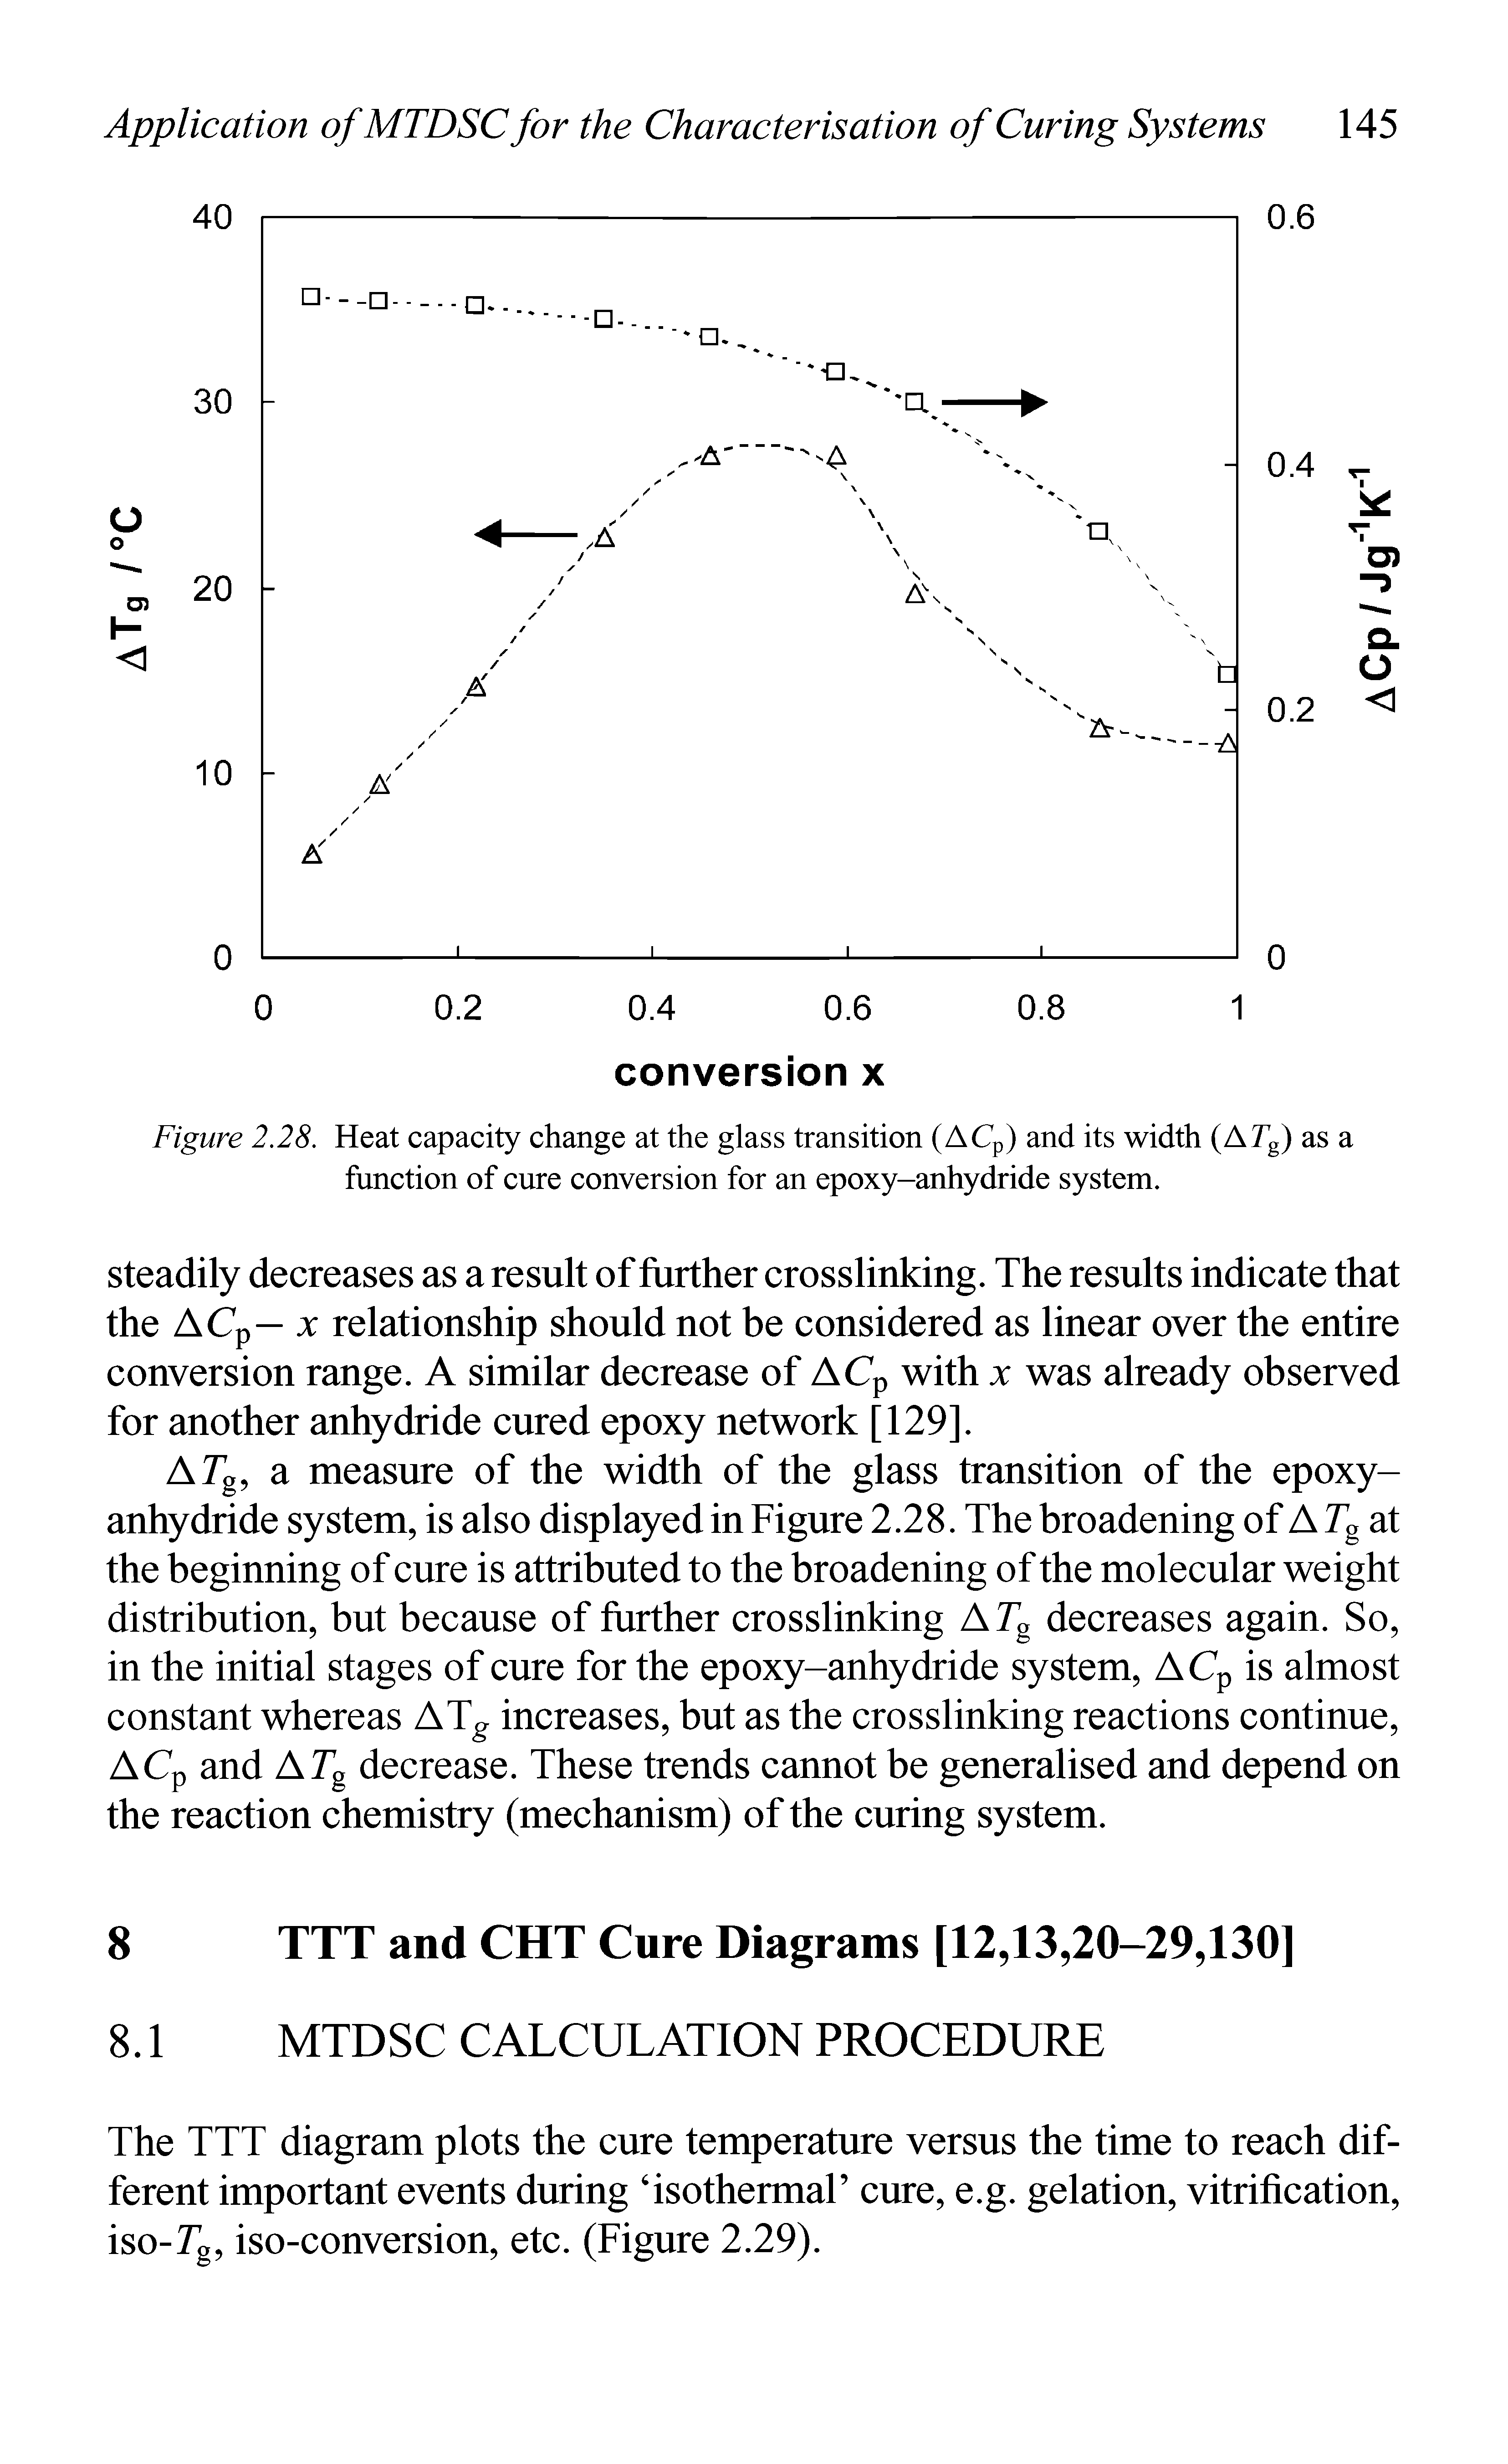 Figure 2.28. Heat capacity change at the glass transition (ACp) and its width (A7g) as a function of cure conversion for an epoxy-anhydride system.